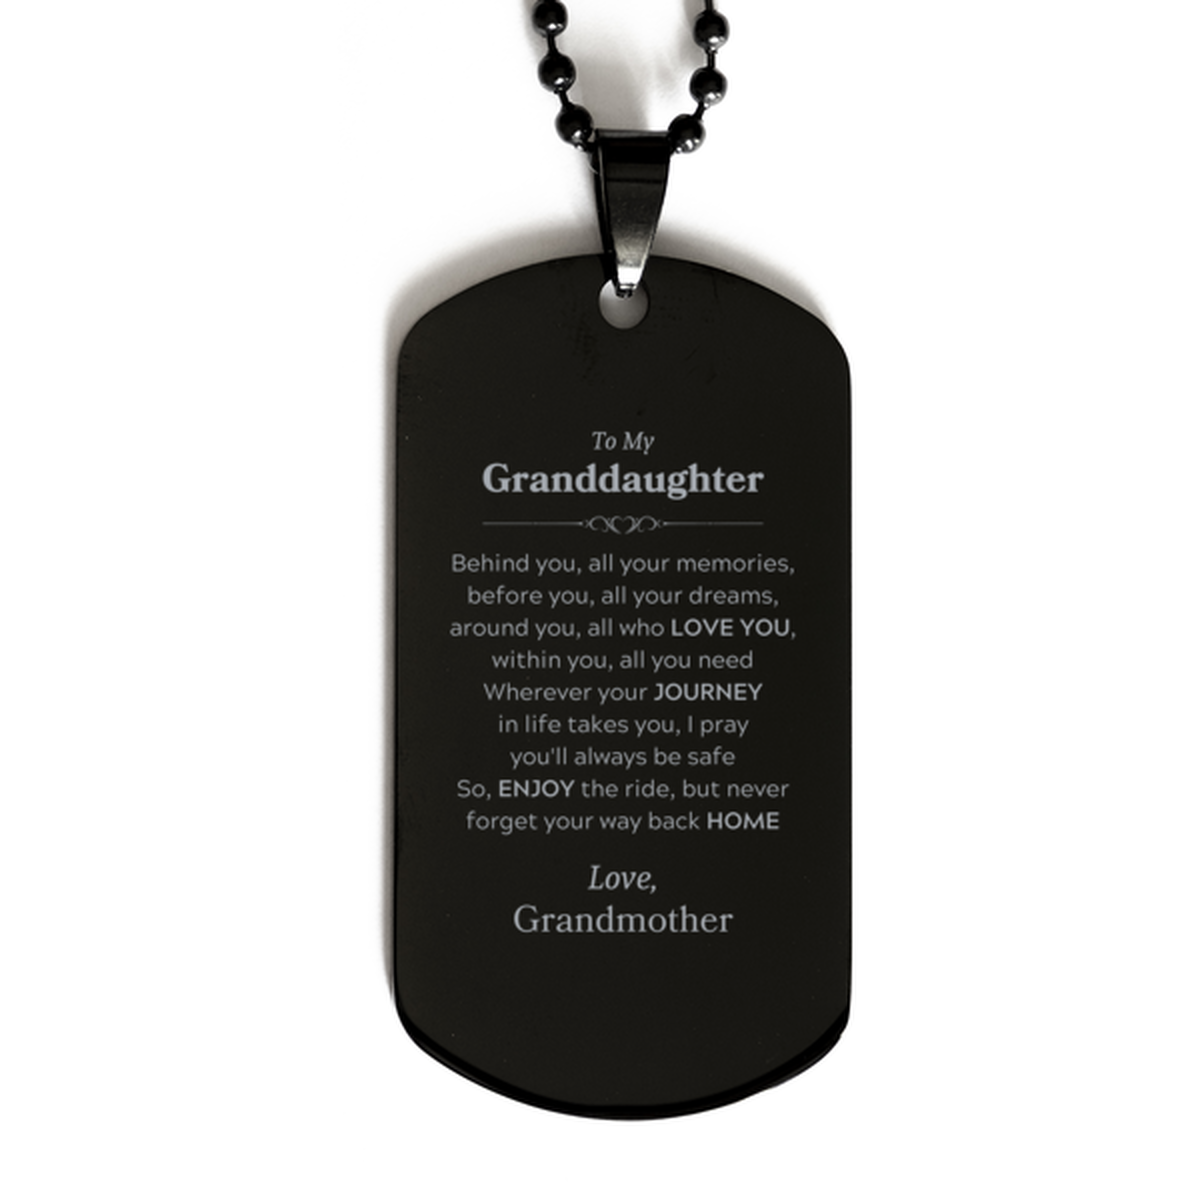 To My Granddaughter Graduation Gifts from Grandmother, Granddaughter Black Dog Tag Christmas Birthday Gifts for Granddaughter Behind you, all your memories, before you, all your dreams. Love, Grandmother